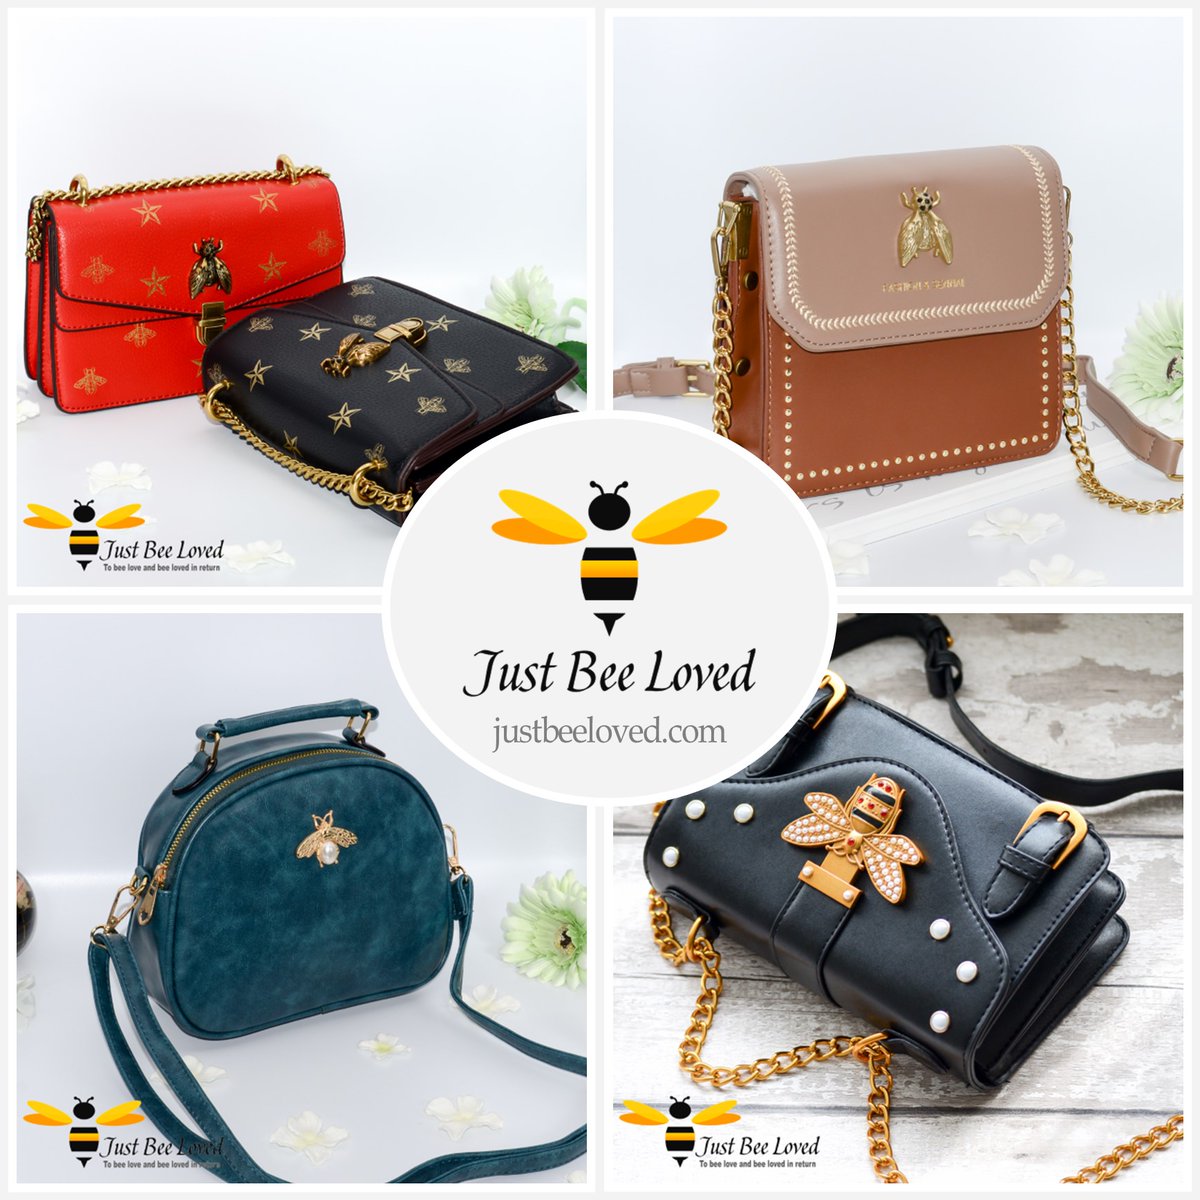 Find your perfect 'Bee' bag with our selection of embellished handbags all made with vegan leather.🐝❤

justbeeloved.com 🐝❤
.
#justbeeloved #beegifts #bees #beebags #giftsforher #handbags #veganhandbags #lovenature #savethebees #puleather #veganleather #veganleatherbag